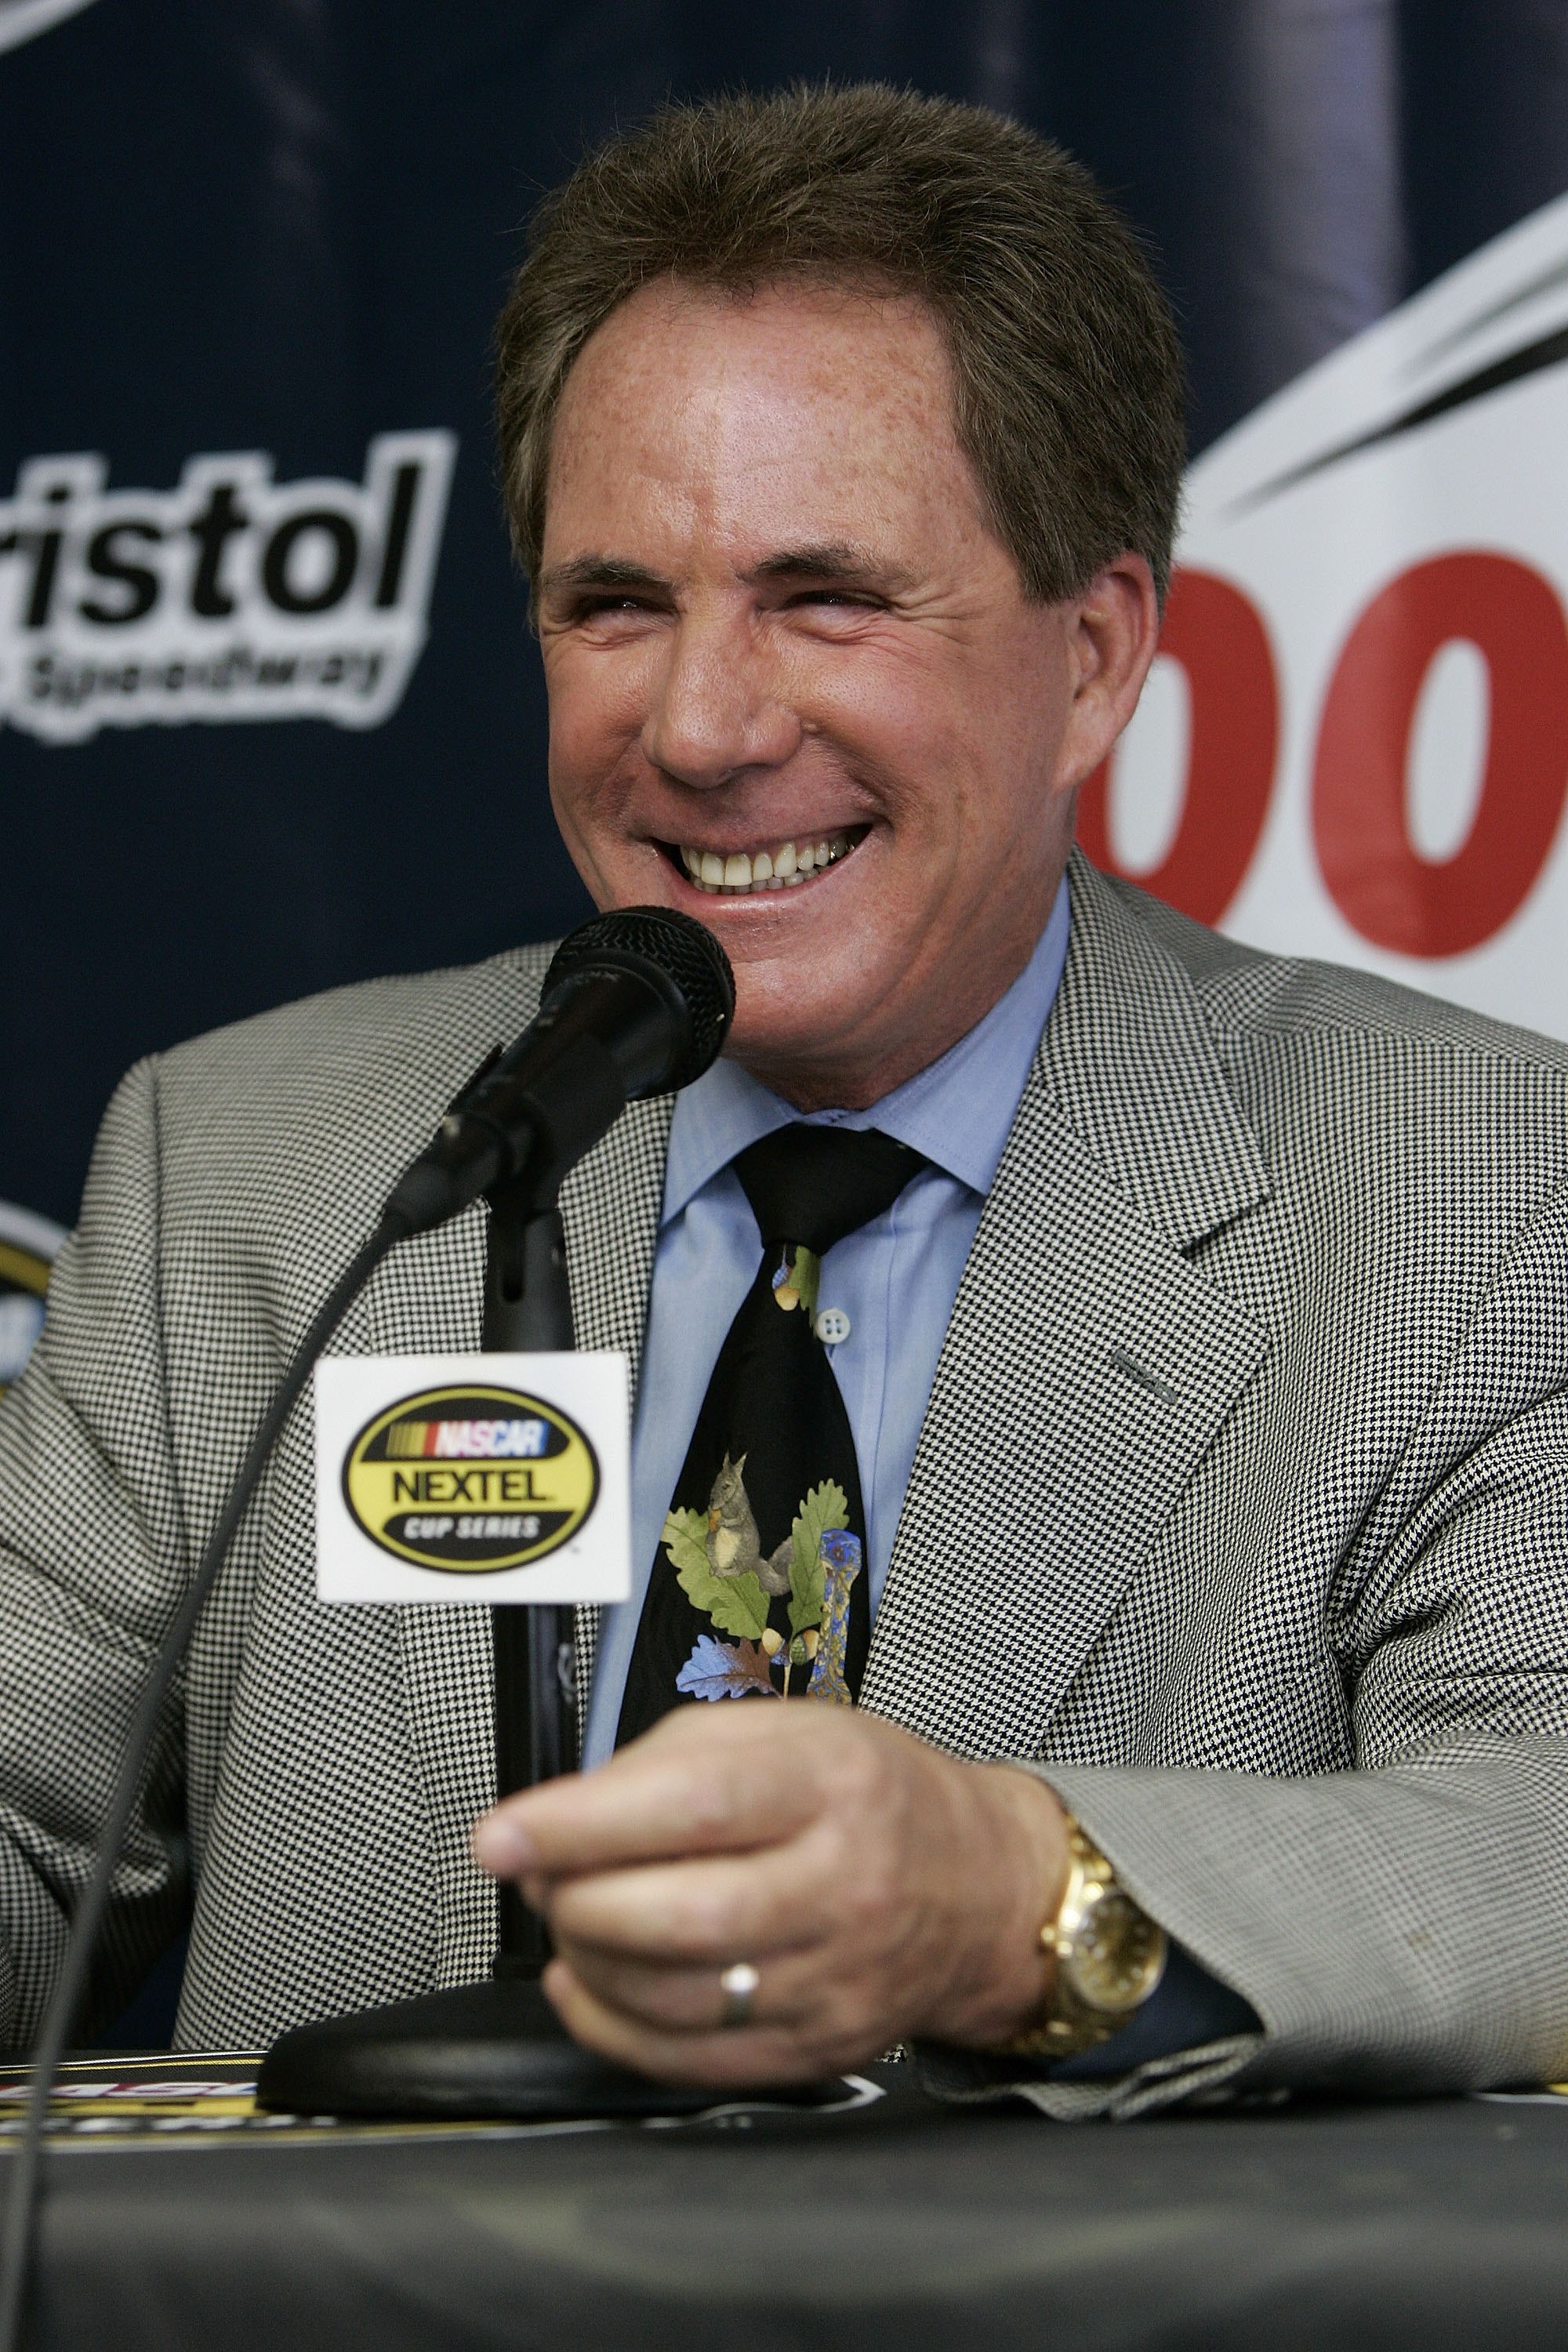 BRISTOL, TN - MARCH 25:  Former NASCAR driver Darrell Waltrip speaks during a press conference at Bristol Motor Speedway on March 25, 2007 in Bristol, Tennessee.  (Photo by Jason Smith/Getty Images for NASCAR)